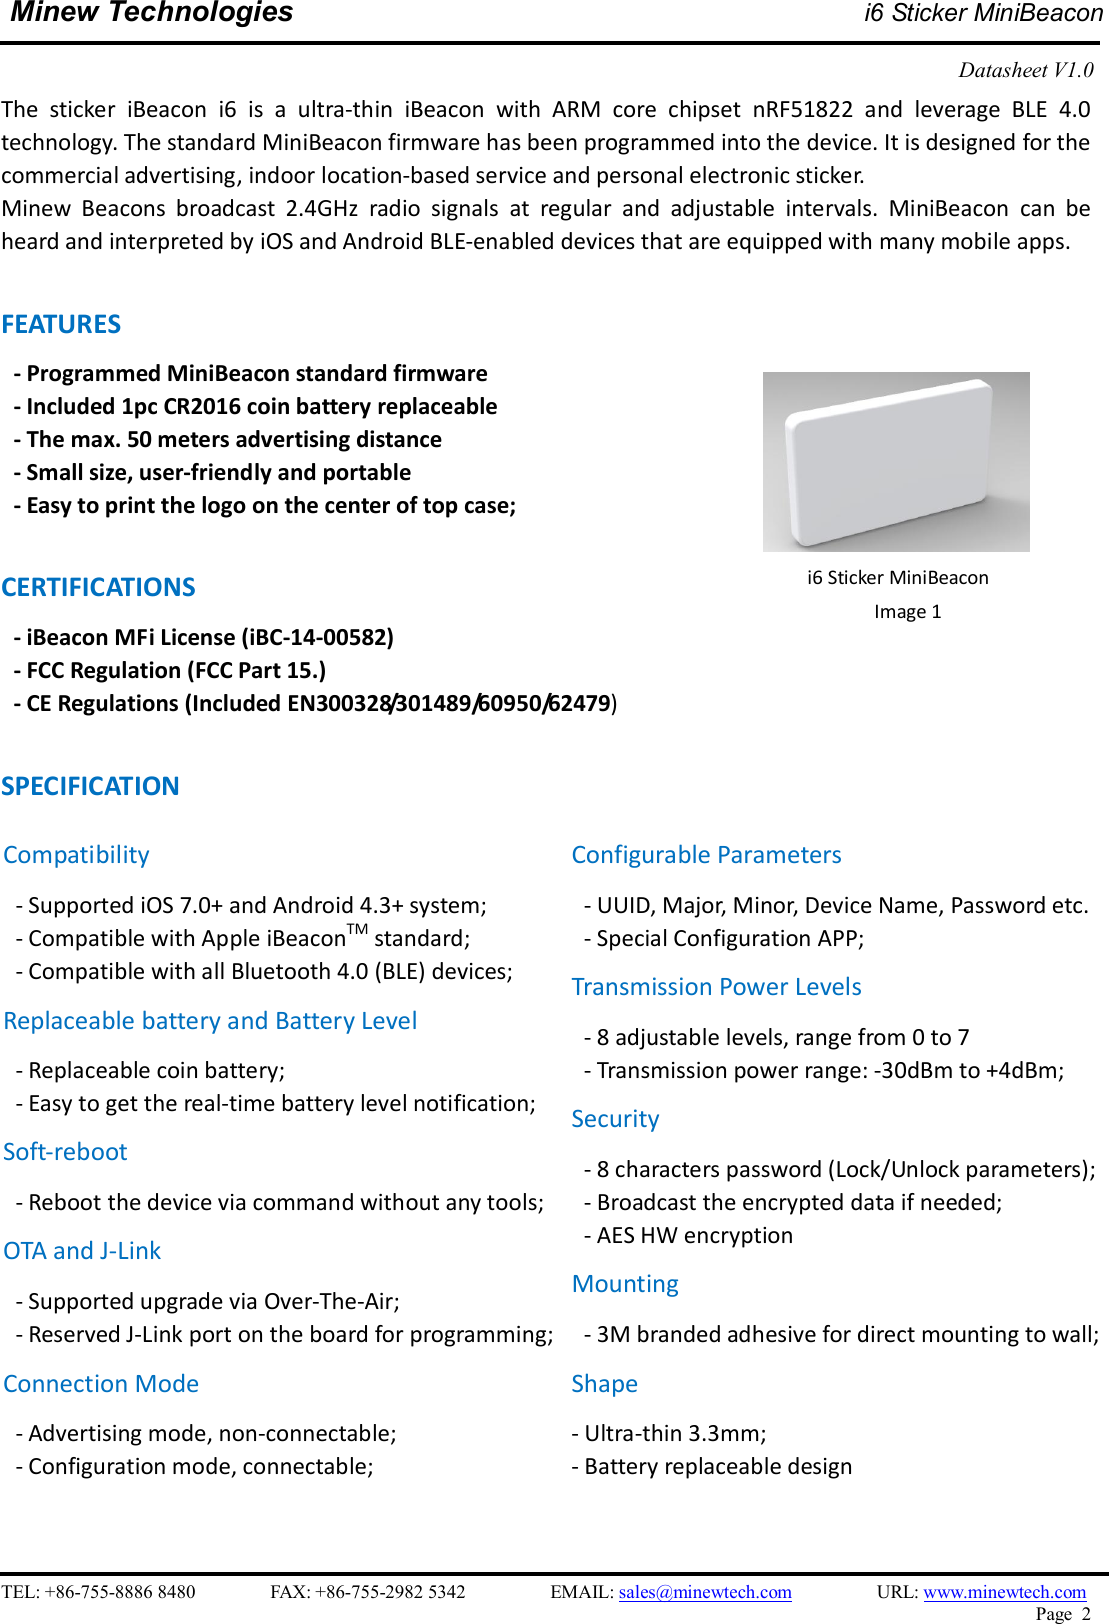    TEL: +86-755-8886 8480                FAX: +86-755-2982 5342                  EMAIL: sales@minewtech.com                  URL: www.minewtech.com Page  2  Minew Technologies i6 Sticker MiniBeacon  Datasheet V1.0    The  sticker  iBeacon  i6  is  a  ultra-thin  iBeacon  with  ARM  core  chipset  nRF51822  and  leverage  BLE  4.0 technology. The standard MiniBeacon firmware has been programmed into the device. It is designed for the commercial advertising, indoor location-based service and personal electronic sticker. Minew  Beacons  broadcast  2.4GHz  radio  signals  at  regular  and  adjustable  intervals.  MiniBeacon  can  be heard and interpreted by iOS and Android BLE-enabled devices that are equipped with many mobile apps.  FEATURES   - Programmed MiniBeacon standard firmware   - Included 1pc CR2016 coin battery replaceable - The max. 50 meters advertising distance - Small size, user-friendly and portable - Easy to print the logo on the center of top case;  CERTIFICATIONS - iBeacon MFi License (iBC-14-00582)   - FCC Regulation (FCC Part 15.) - CE Regulations (Included EN300328/301489/60950/62479)  SPECIFICATION                                        i6 Sticker MiniBeacon Image 1   Compatibility - Supported iOS 7.0+ and Android 4.3+ system; - Compatible with Apple iBeaconTM standard;   - Compatible with all Bluetooth 4.0 (BLE) devices; Replaceable battery and Battery Level - Replaceable coin battery; - Easy to get the real-time battery level notification; Soft-reboot   - Reboot the device via command without any tools;   OTA and J-Link - Supported upgrade via Over-The-Air;   - Reserved J-Link port on the board for programming;   Connection Mode - Advertising mode, non-connectable;   - Configuration mode, connectable;  Configurable Parameters - UUID, Major, Minor, Device Name, Password etc. - Special Configuration APP; Transmission Power Levels - 8 adjustable levels, range from 0 to 7 - Transmission power range: -30dBm to +4dBm;   Security - 8 characters password (Lock/Unlock parameters);   - Broadcast the encrypted data if needed; - AES HW encryption Mounting - 3M branded adhesive for direct mounting to wall;   Shape - Ultra-thin 3.3mm;   - Battery replaceable design 